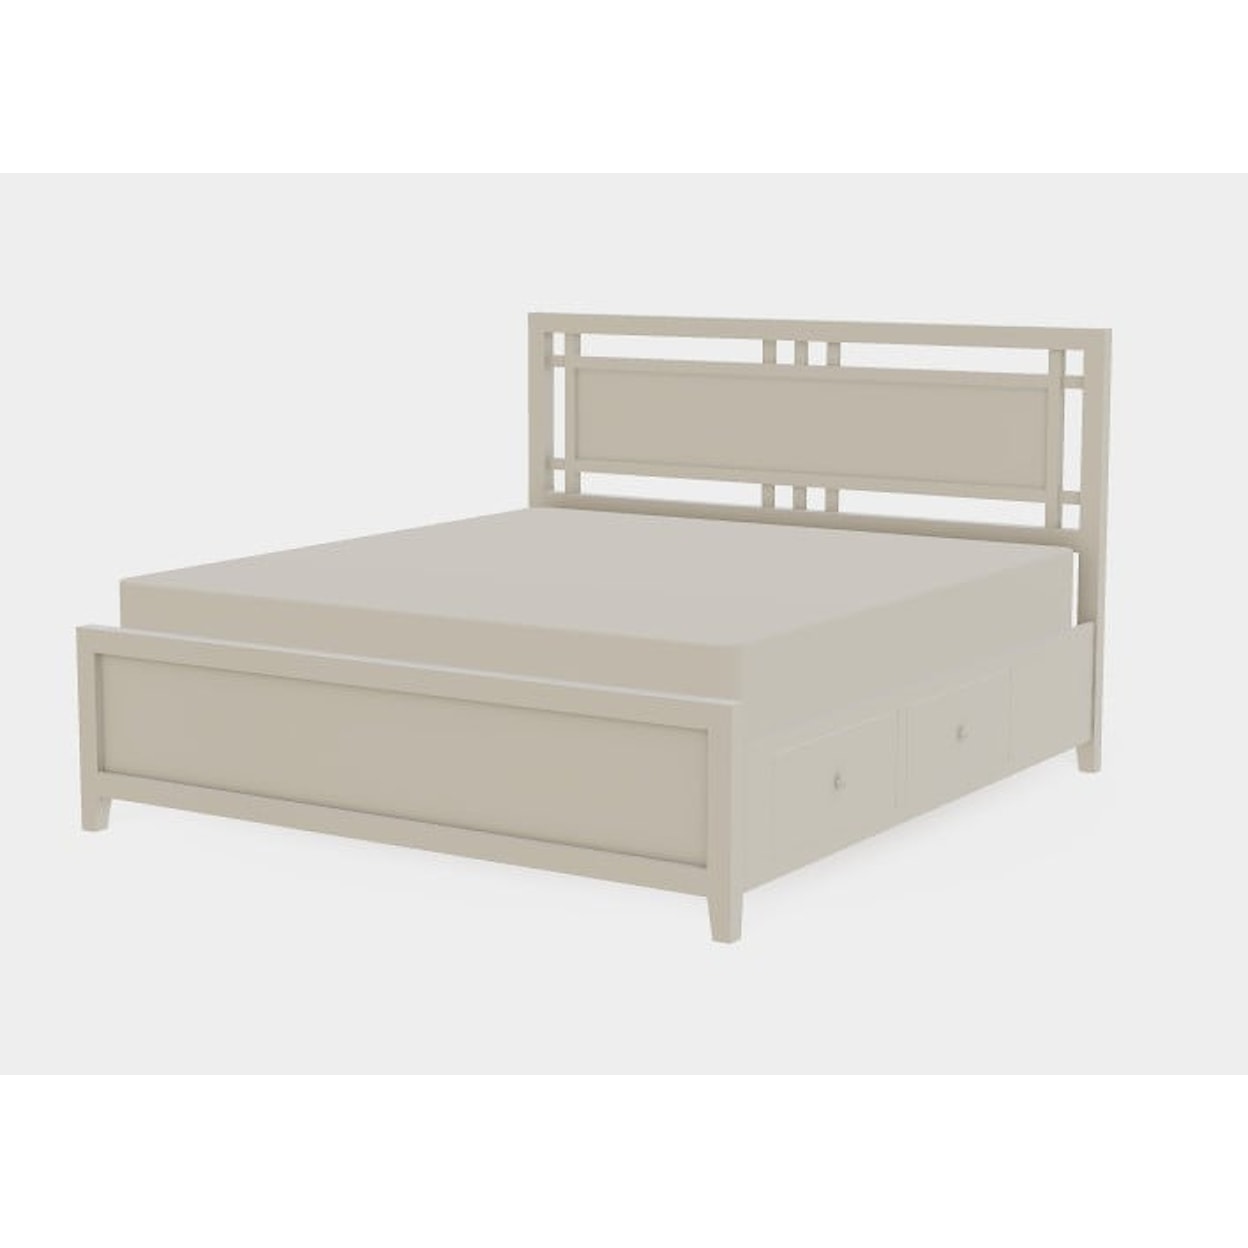 Mavin Atwood Group Atwood King Right Drawerside Gridwork Bed